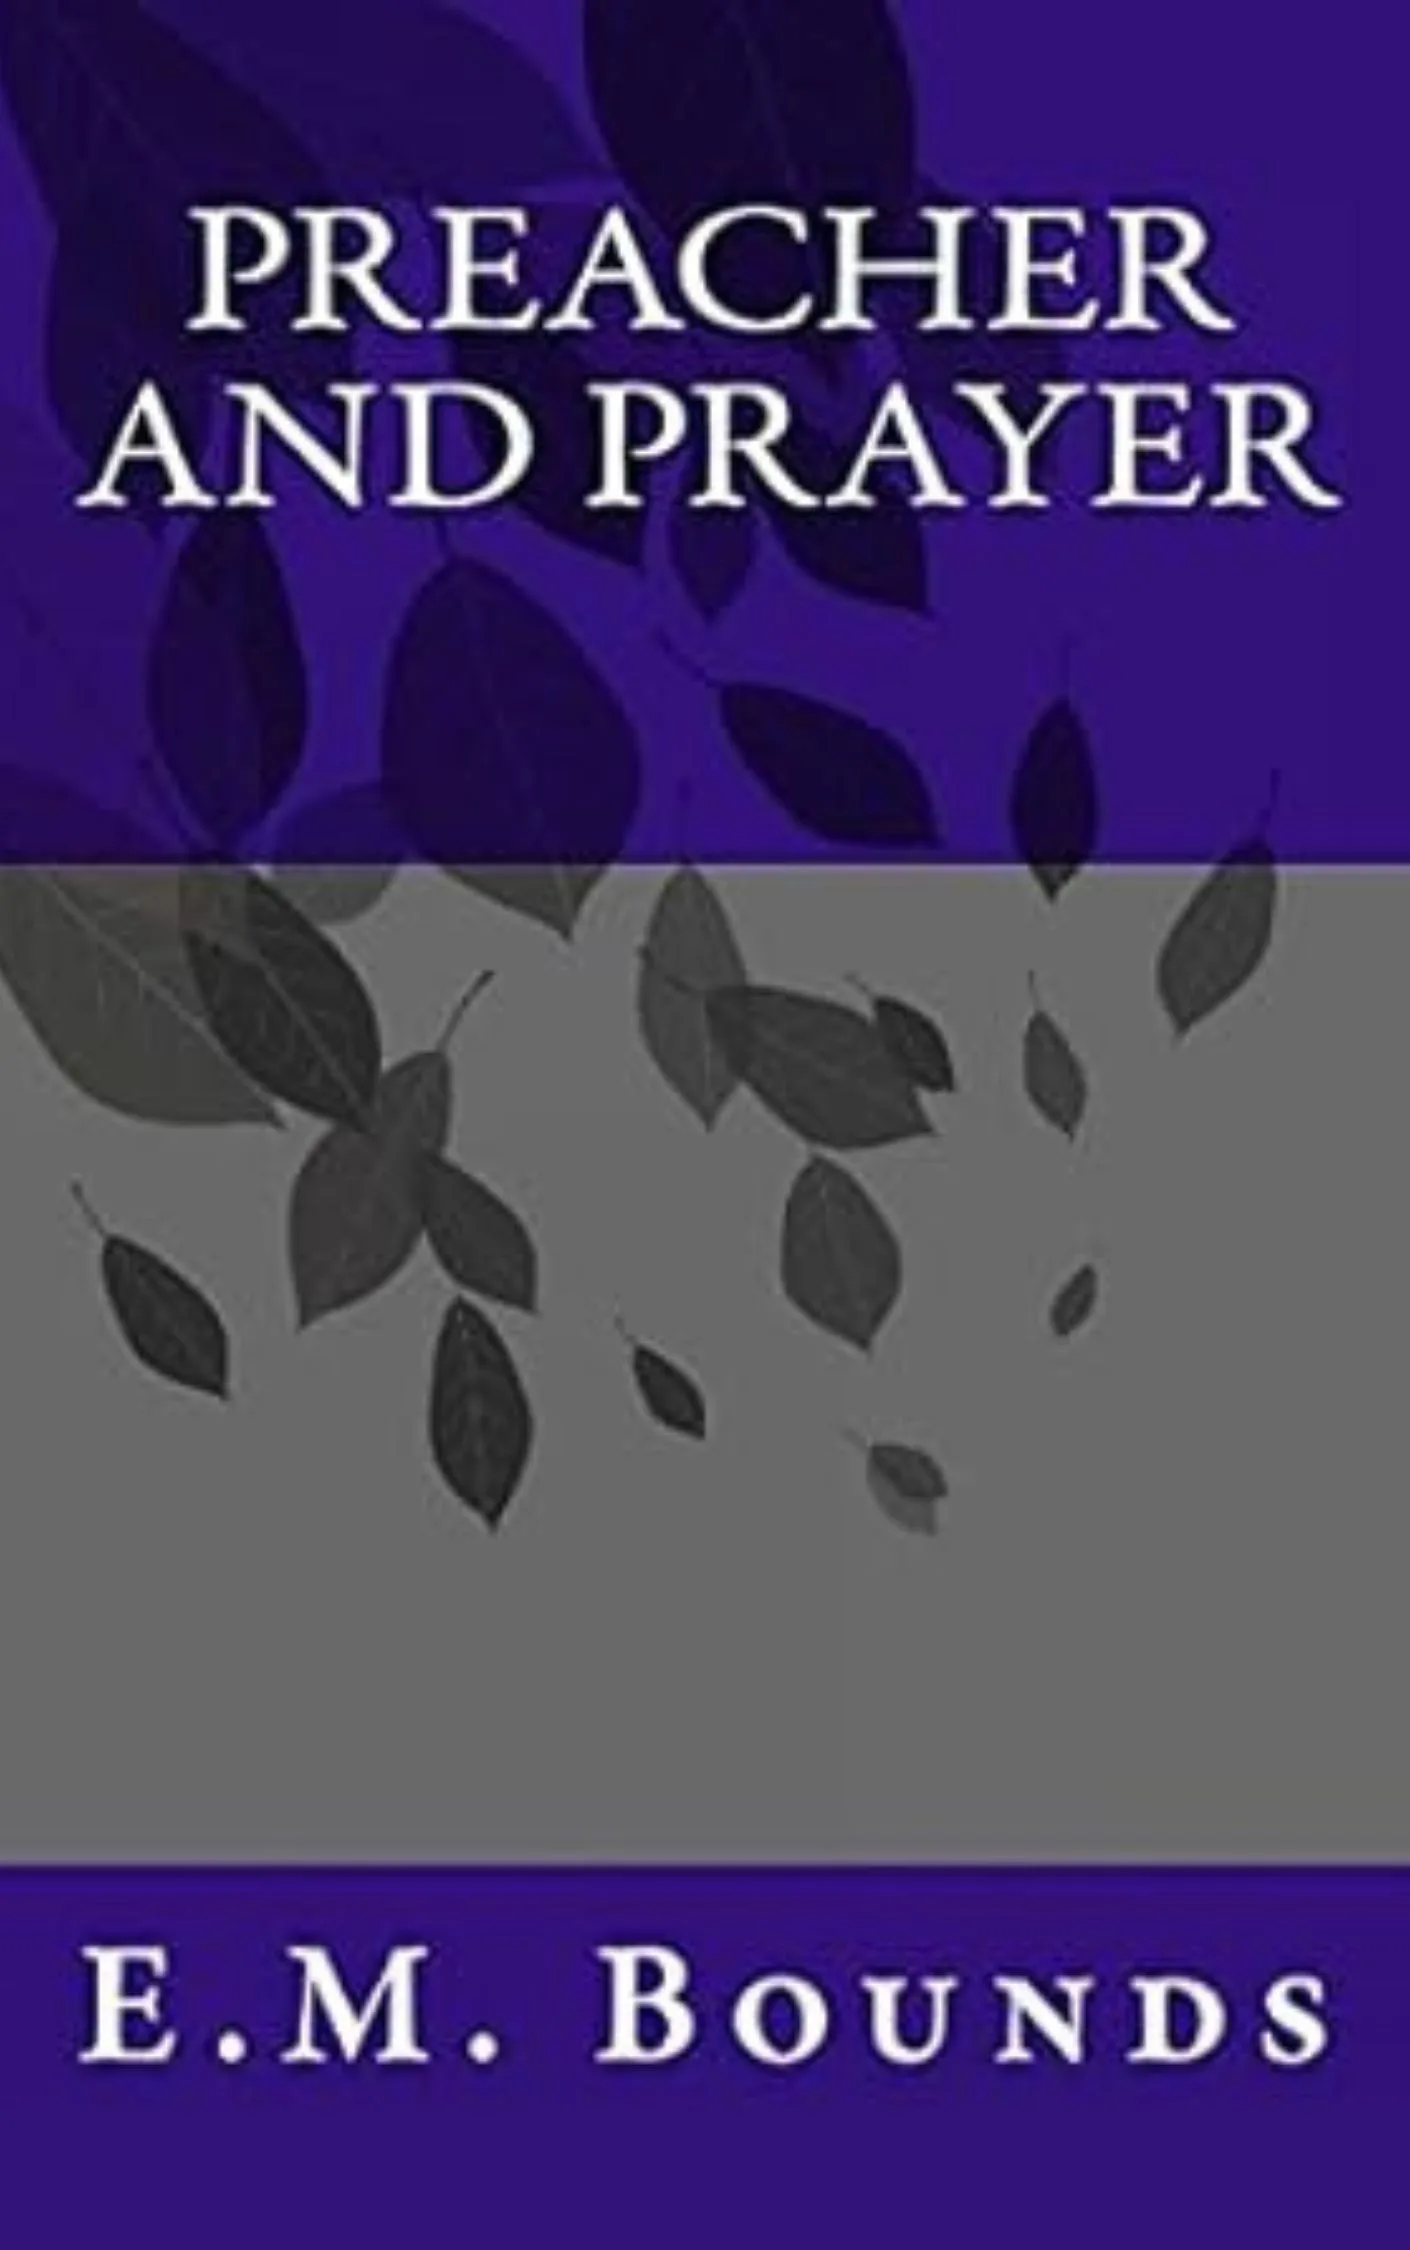 The Preacher and Prayer by E.M. Bounds